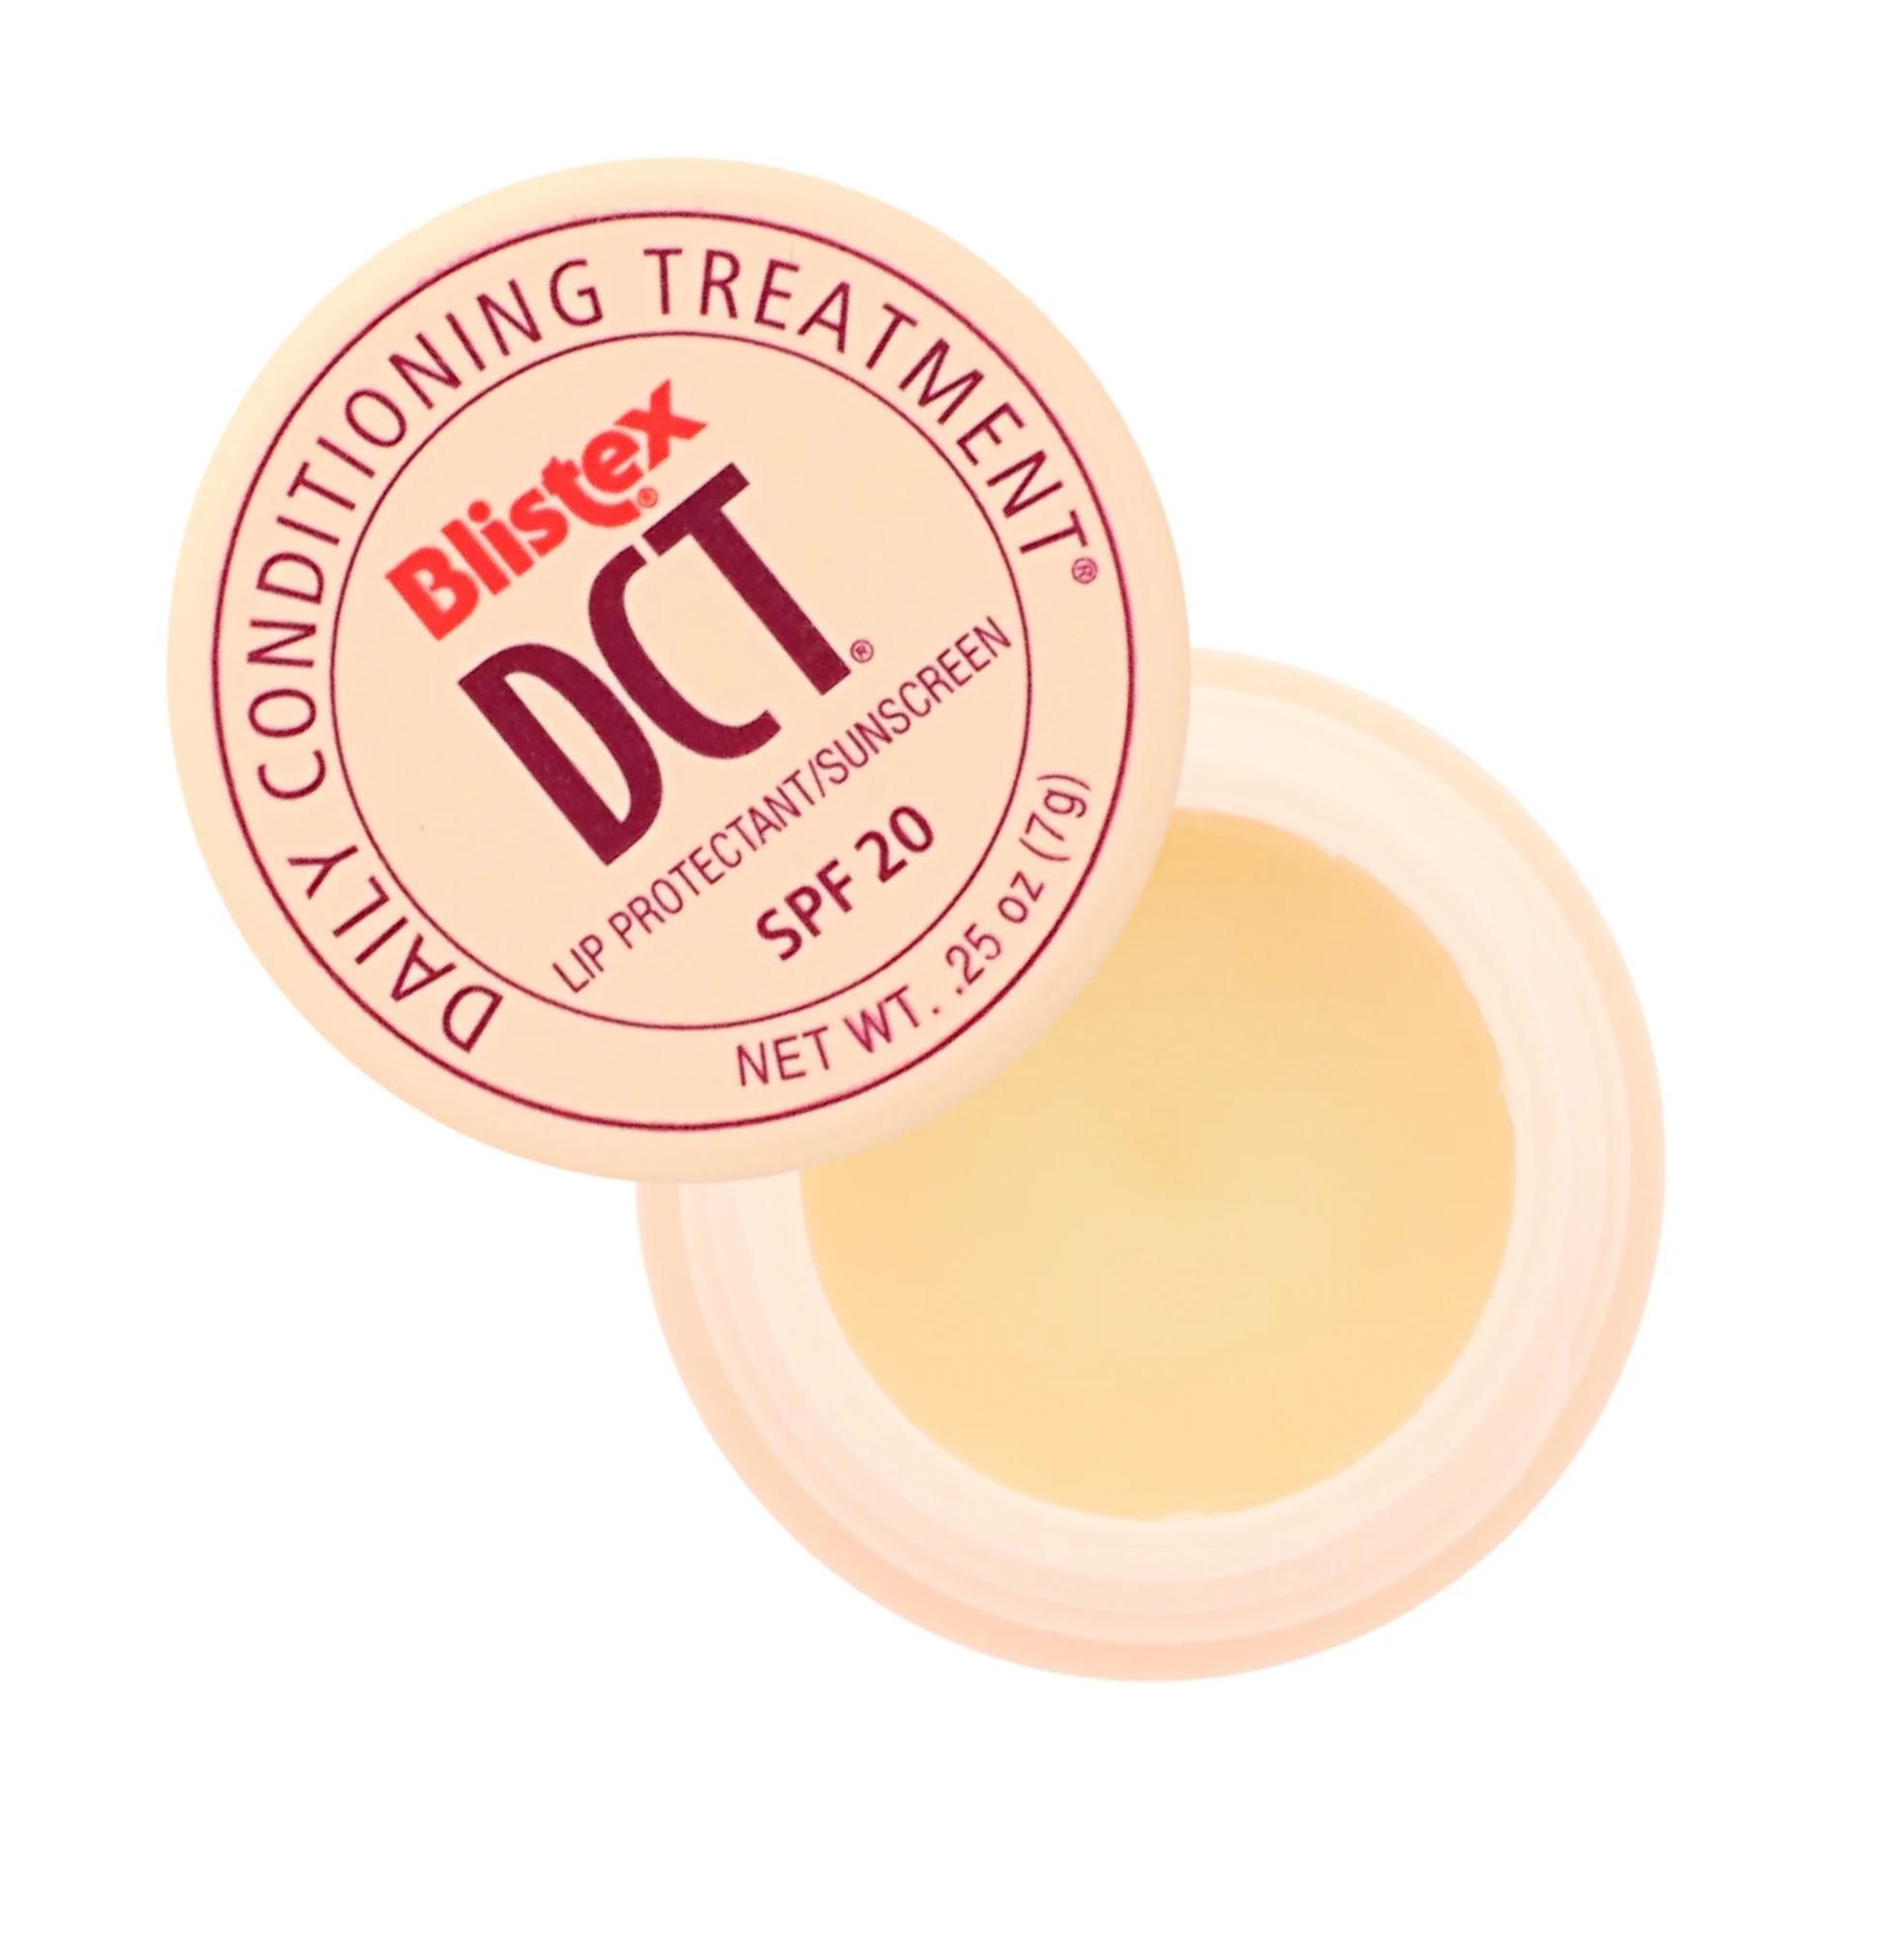 DCT (Daily Conditioning Treatment)